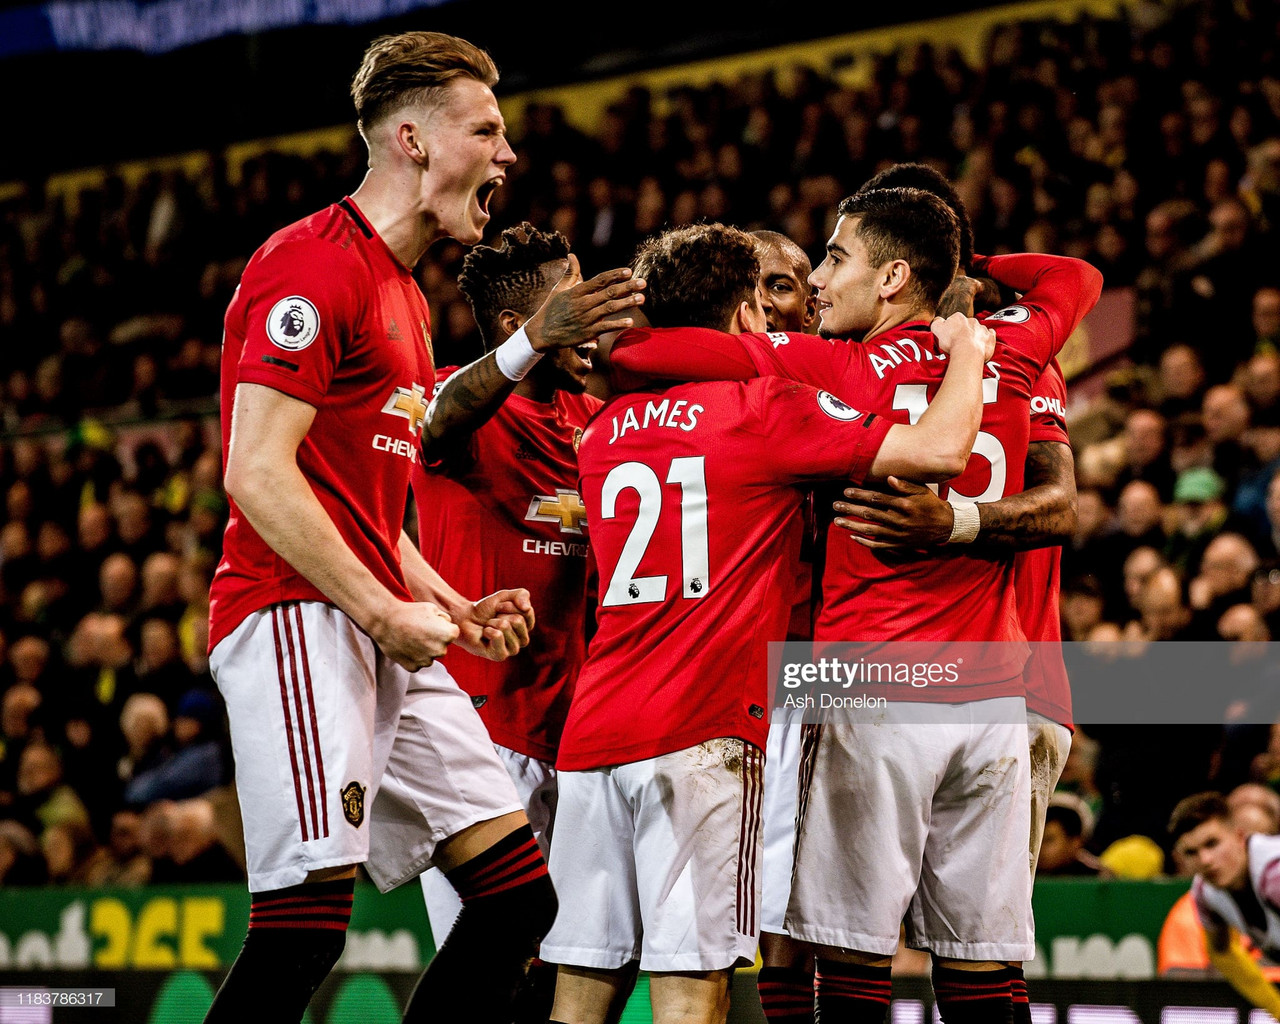 Norwich City 1-3 Manchester United: McTominay nets 2,000th Premier League goal for United